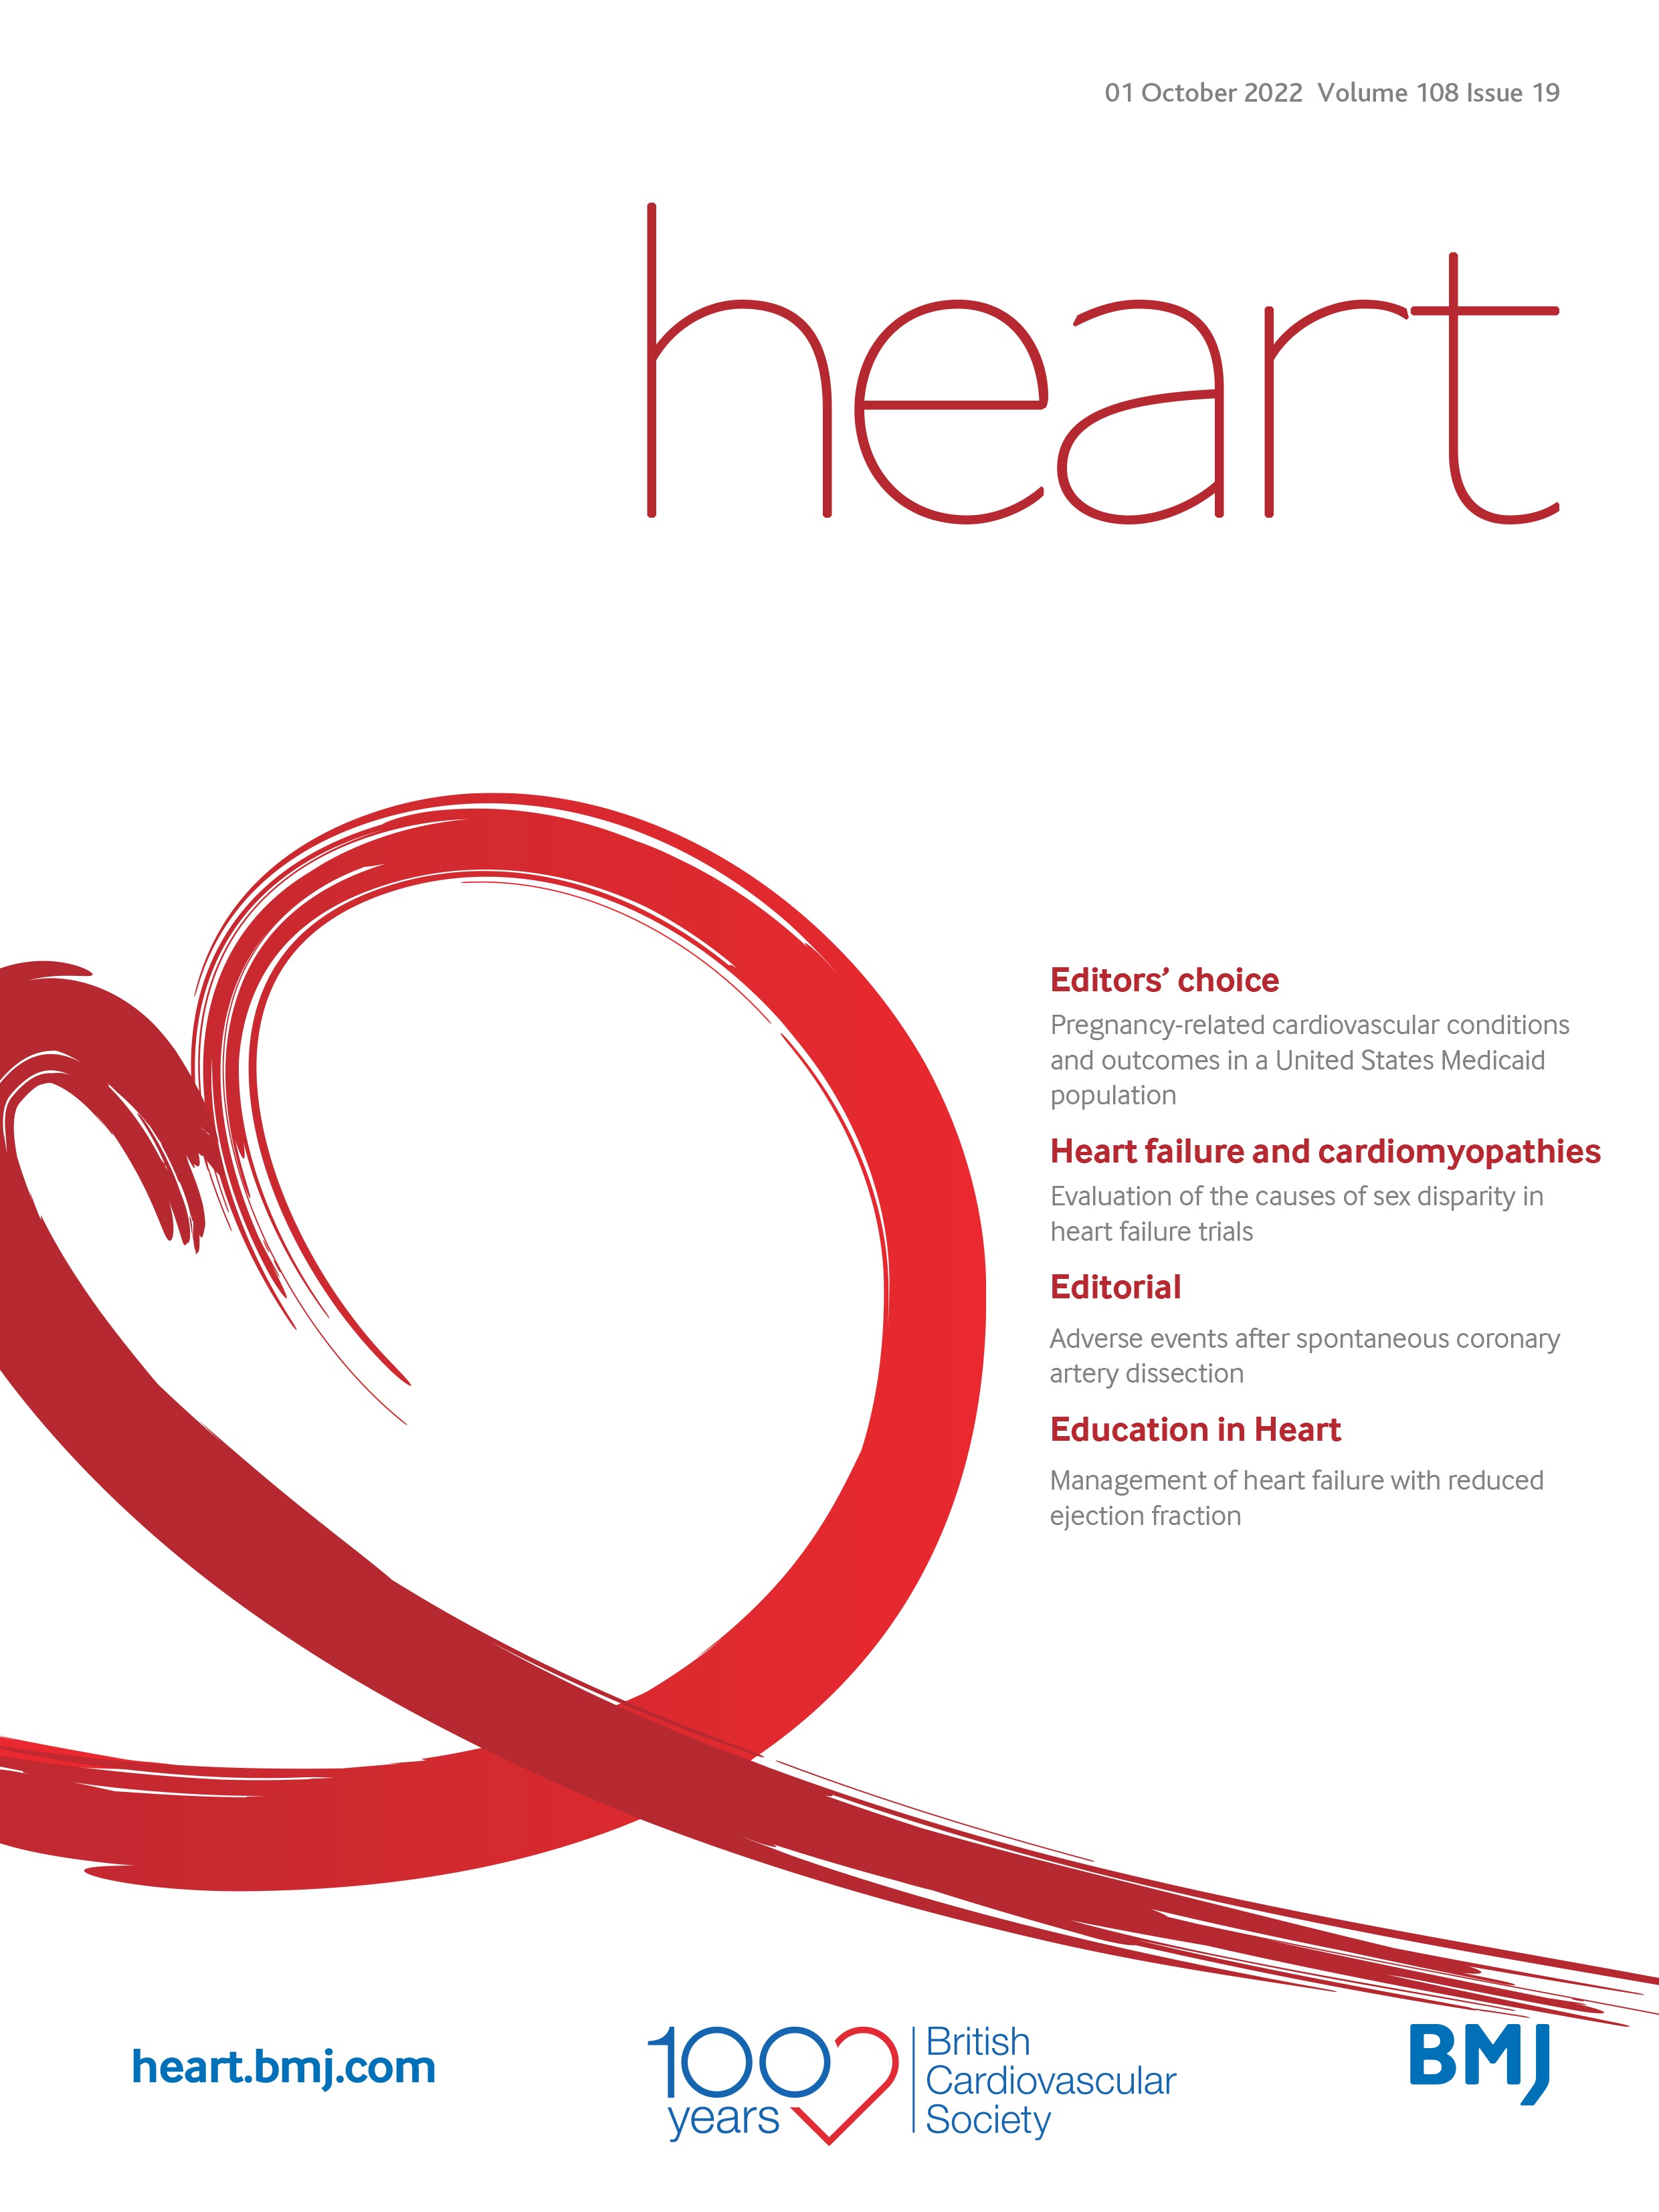 Adverse events after spontaneous coronary artery dissection